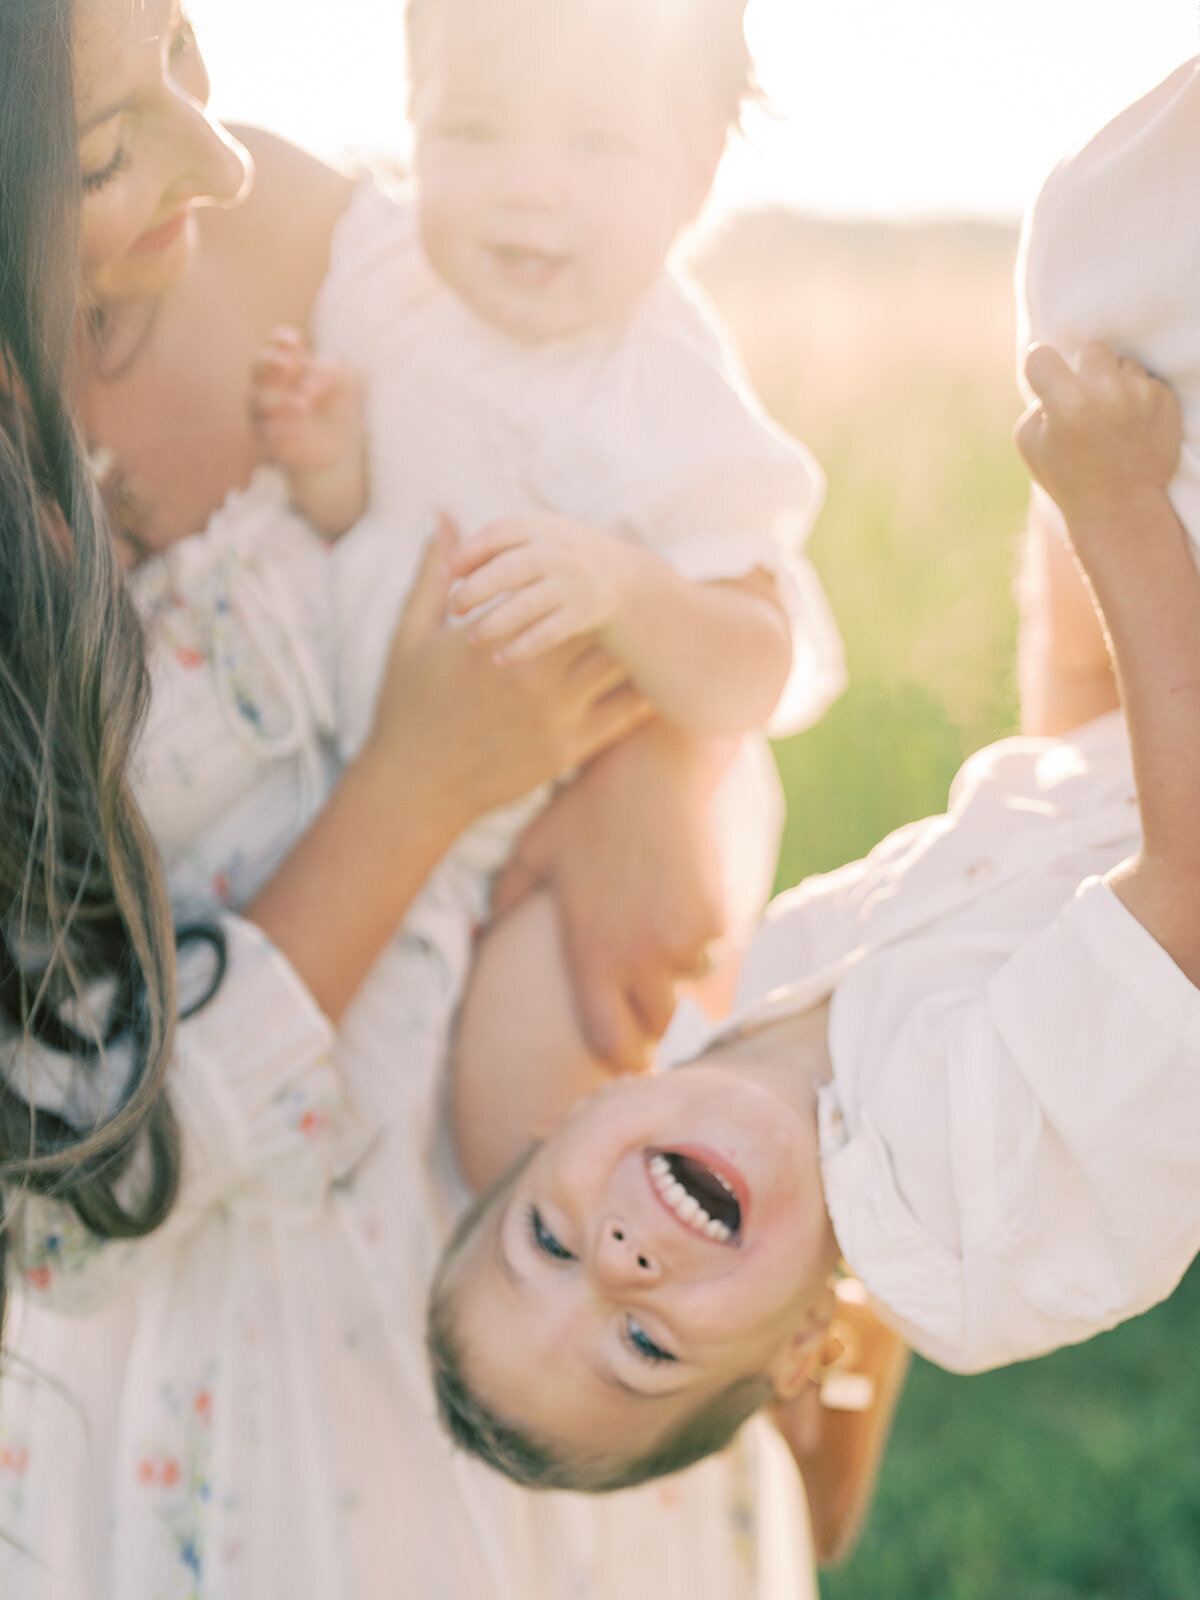 Toddler boy is held upside down laughing by his father as his mother holds his sister laughing next to him.